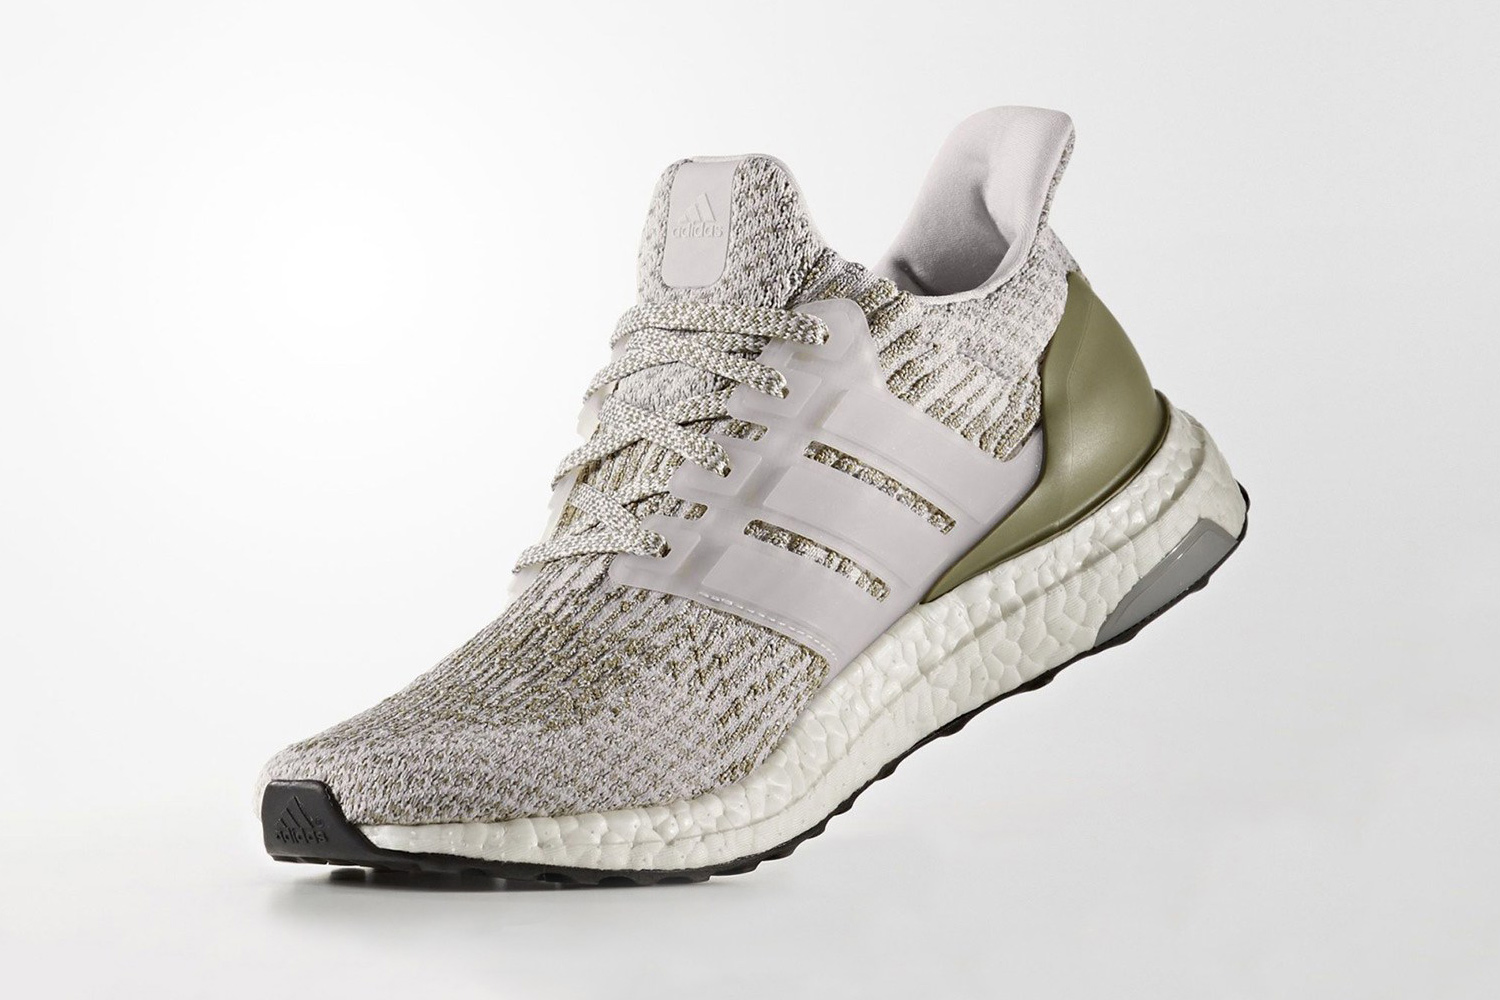 Adidas UltraBOOST 3.0 Is To Arrive In A New Olive Colourway